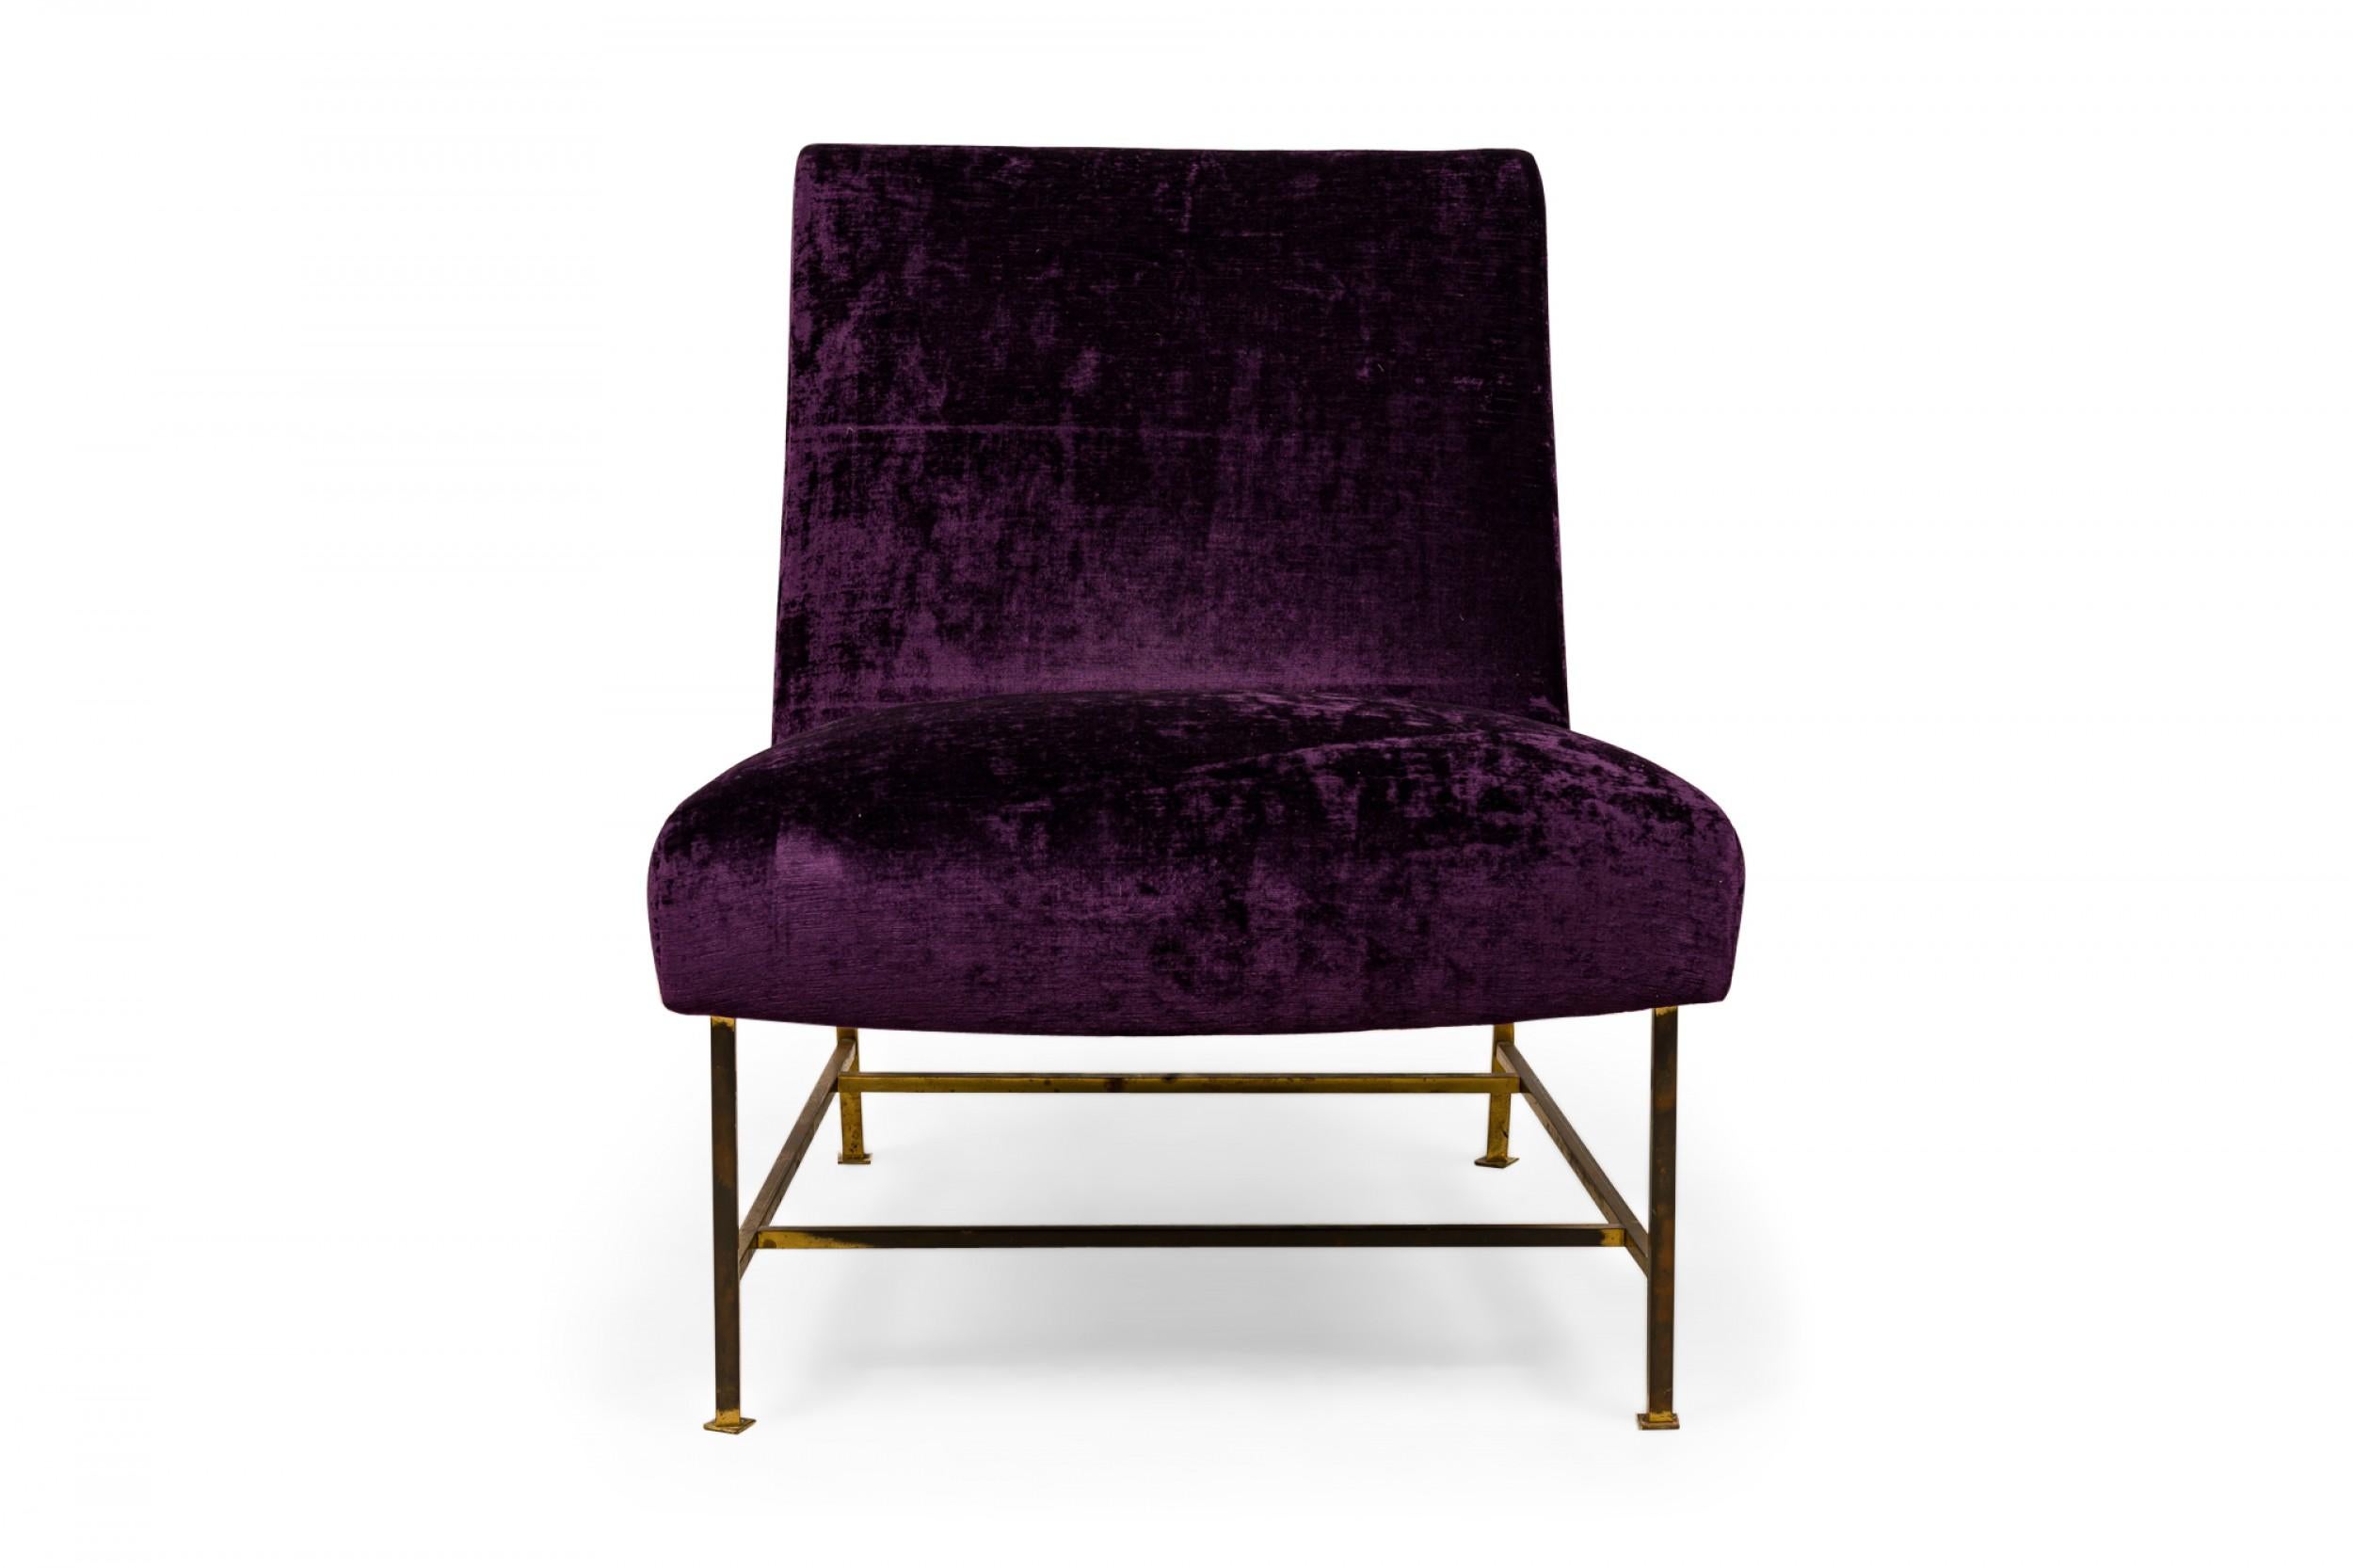 American Mid-Century slipper chair with crushed purple velour upholstery resting on four brass legs with stretchers connecting the front and back legs, ending in circular feet. (HARVEY PROBBER)
